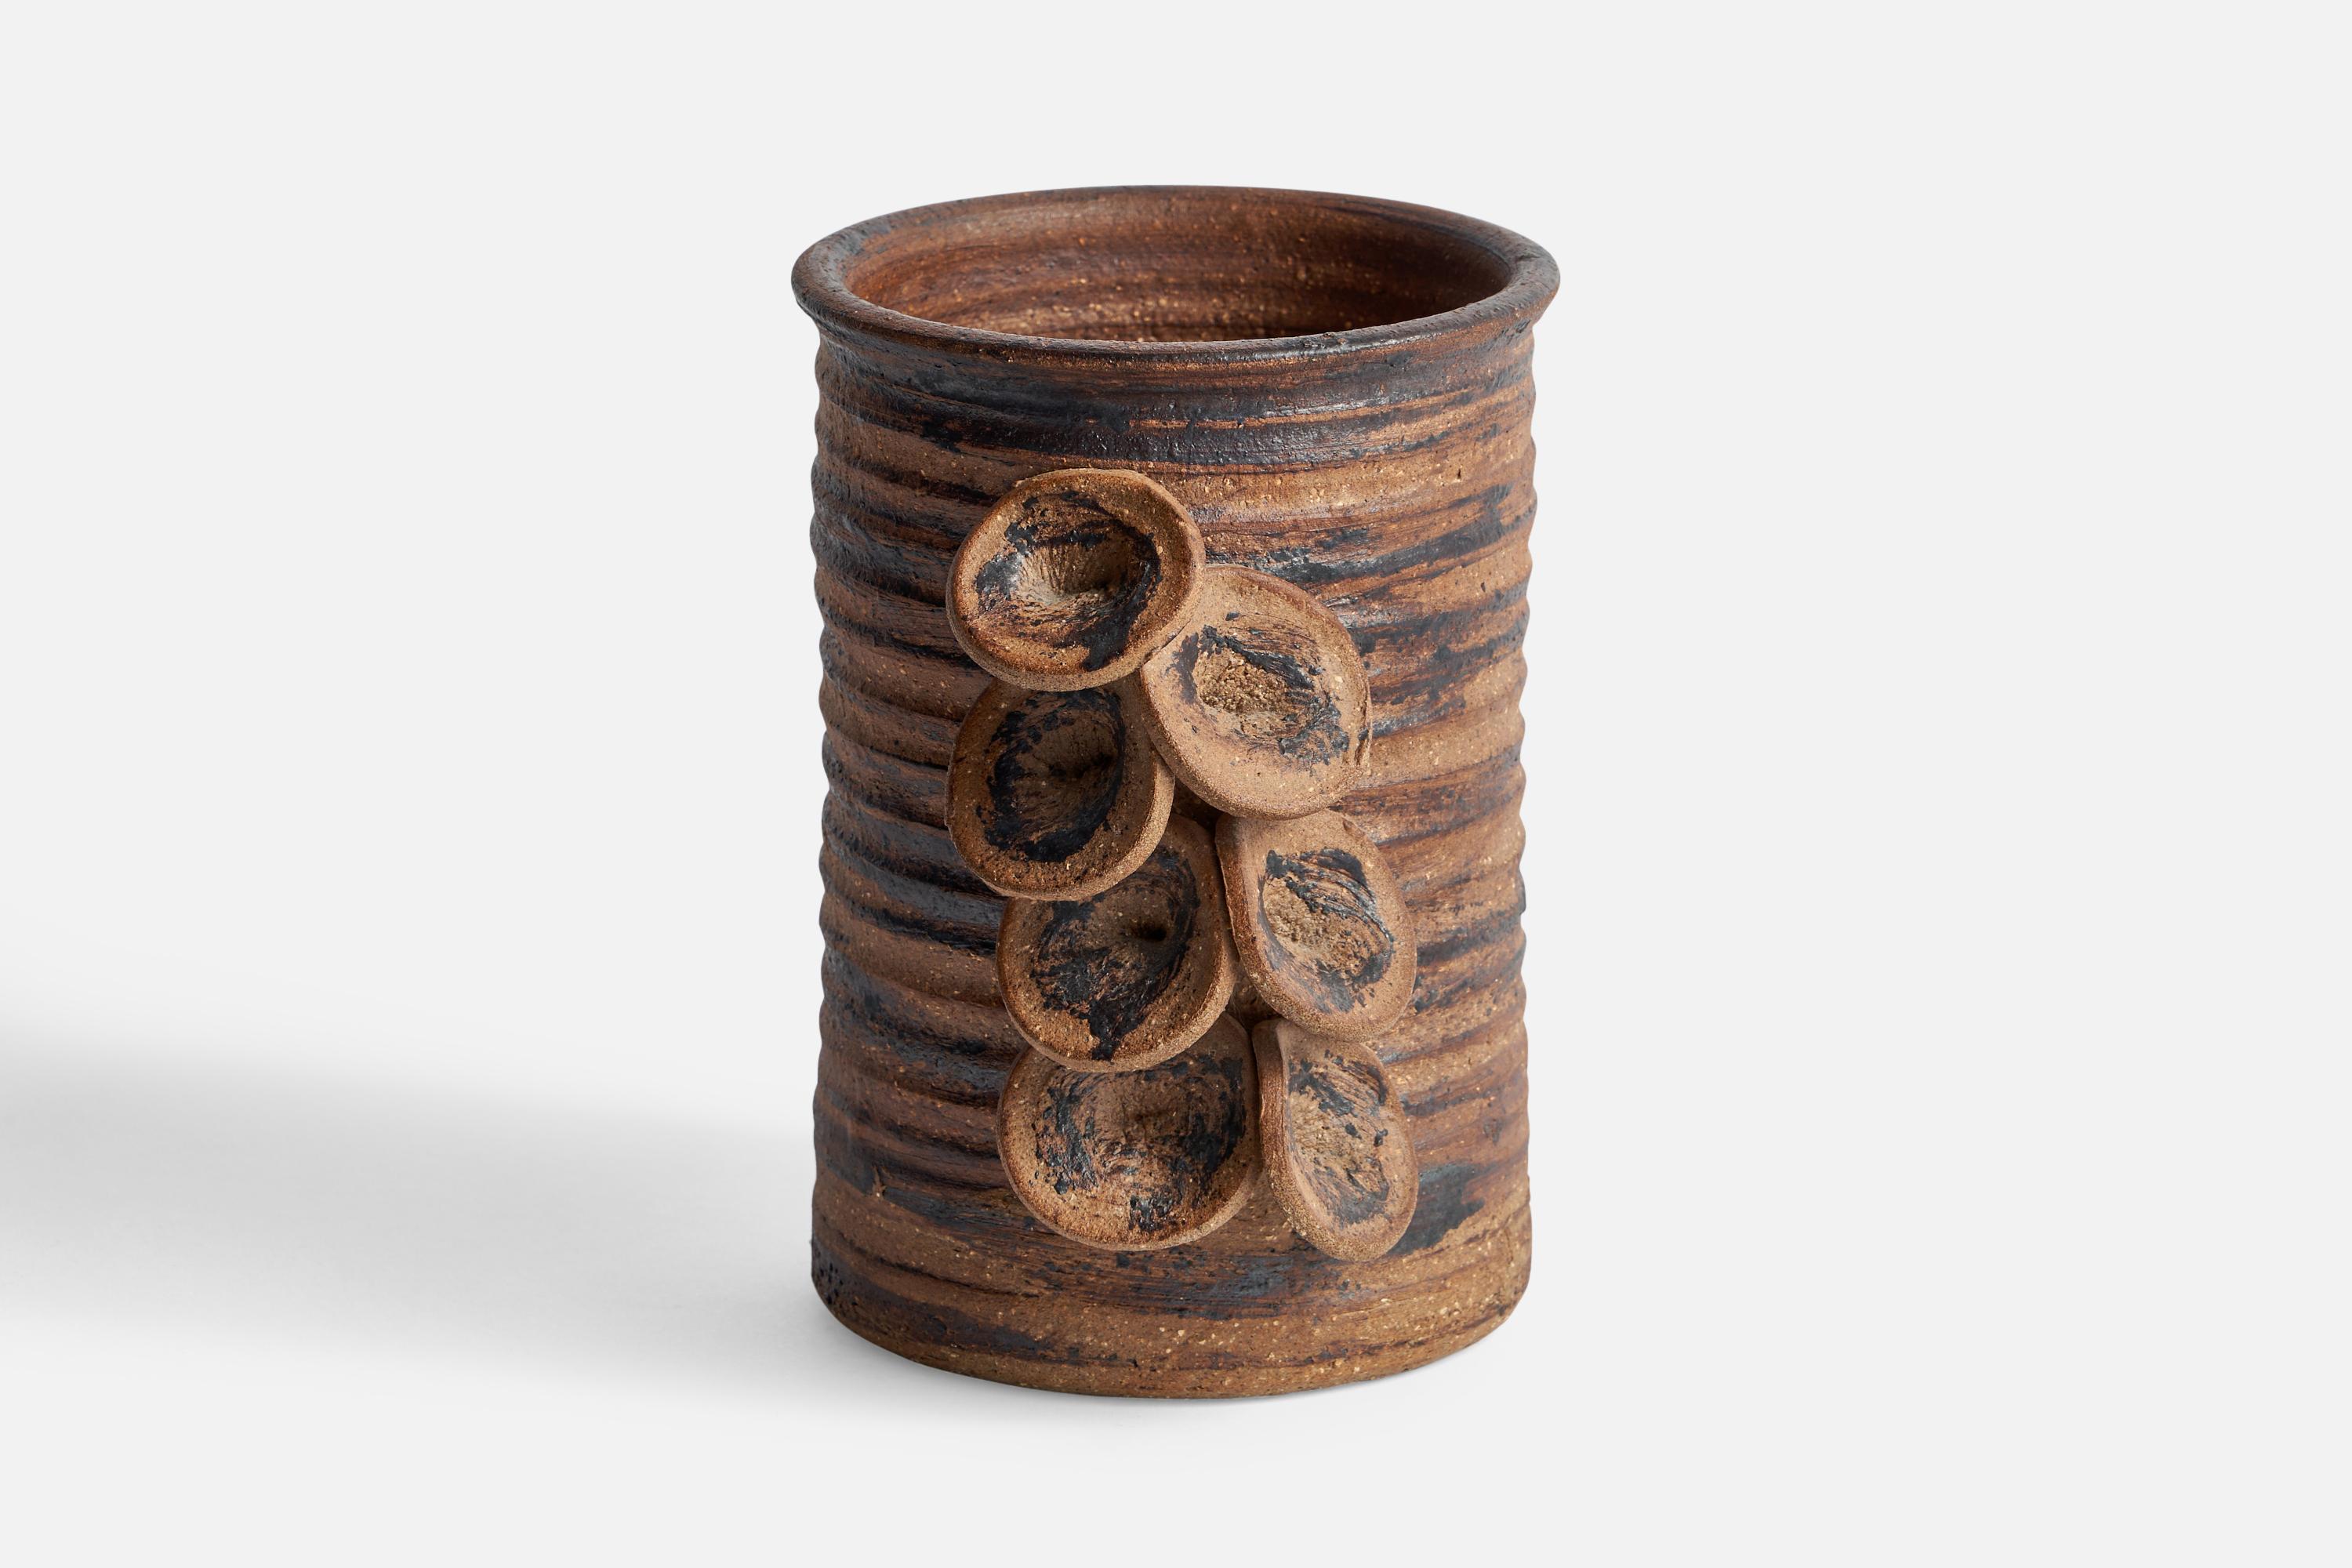 A brown and black ceramic vase designed and produced in Denmark, c. 1960s.